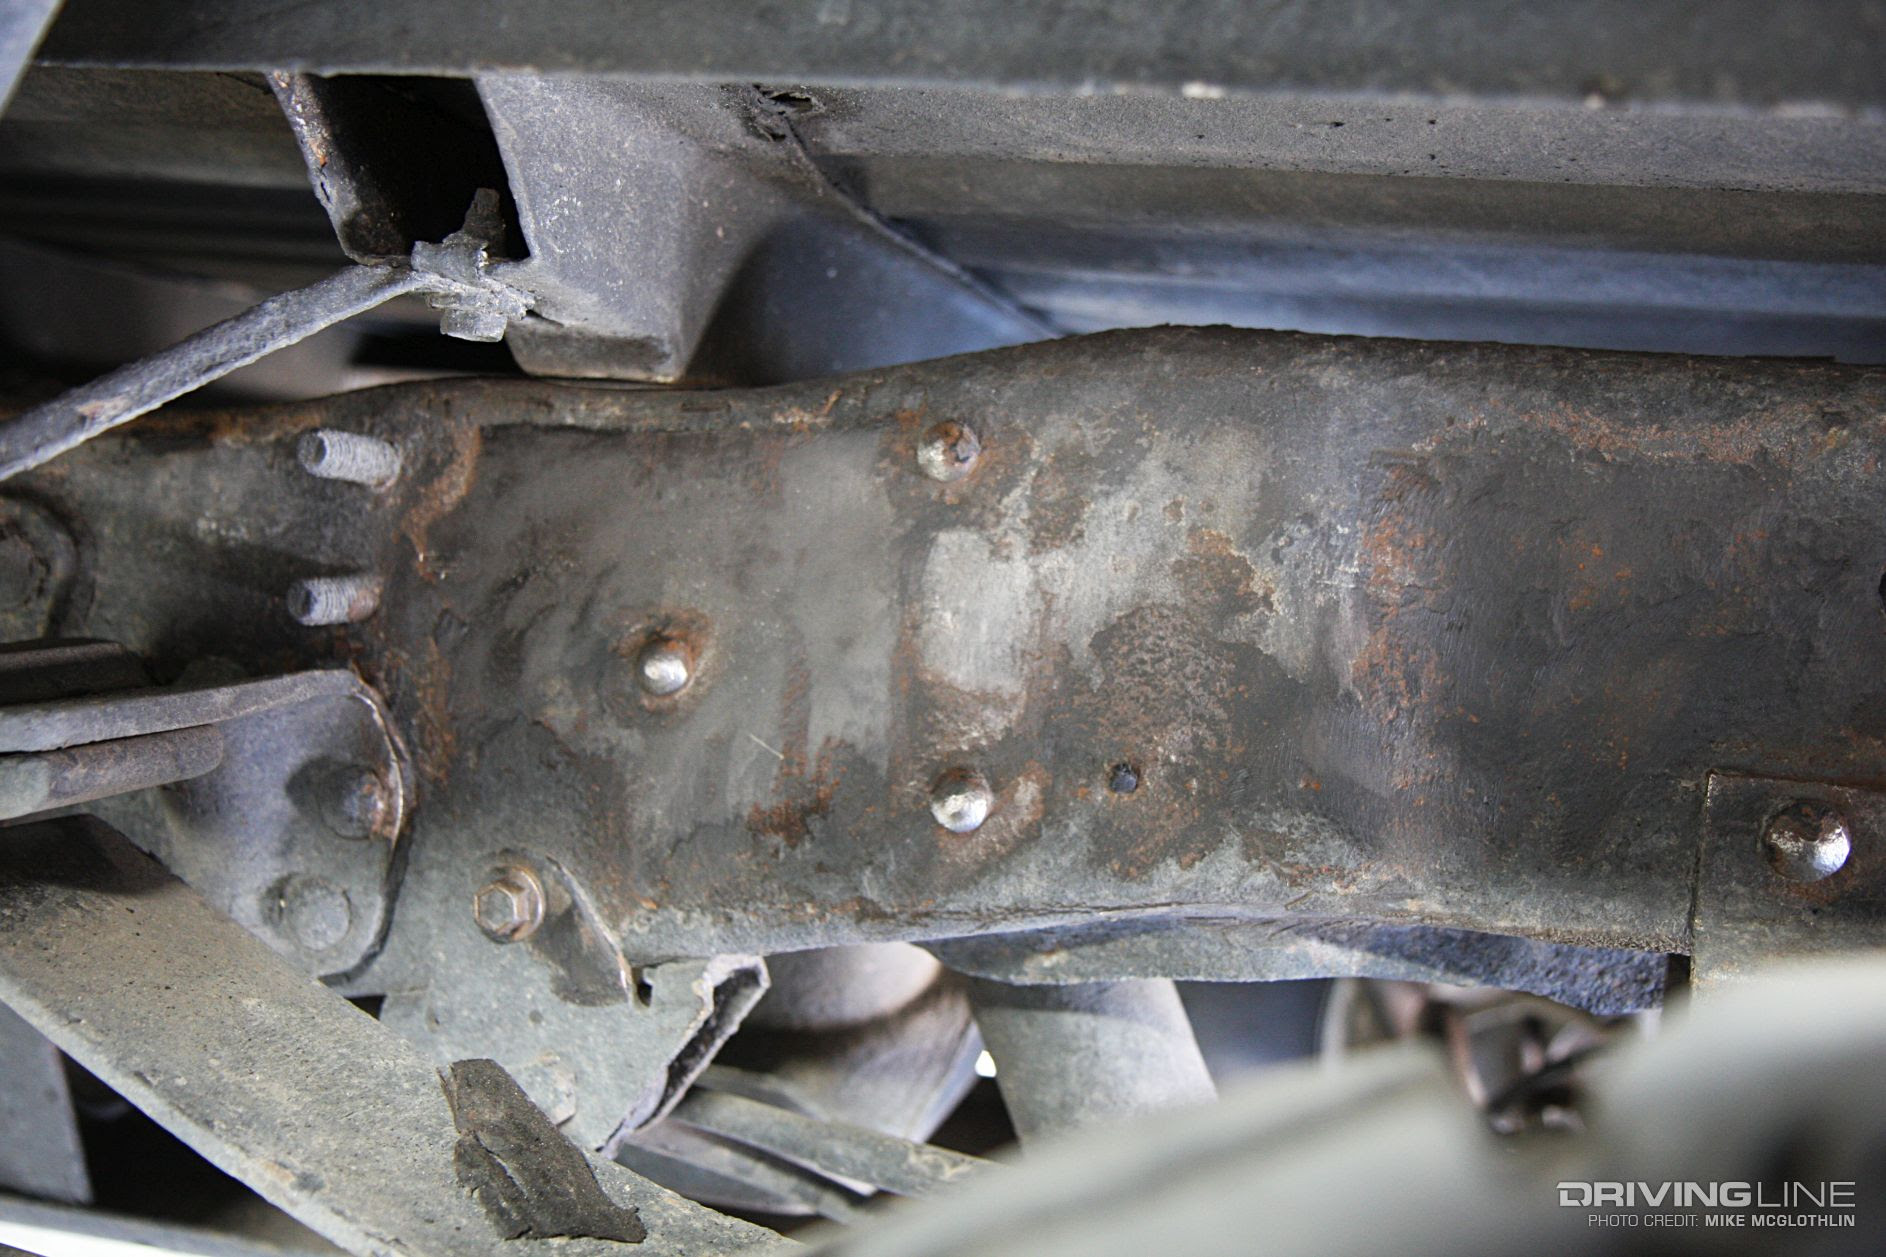 How To Remove Surface Rust From A Car Frame - dHIFA bLOG